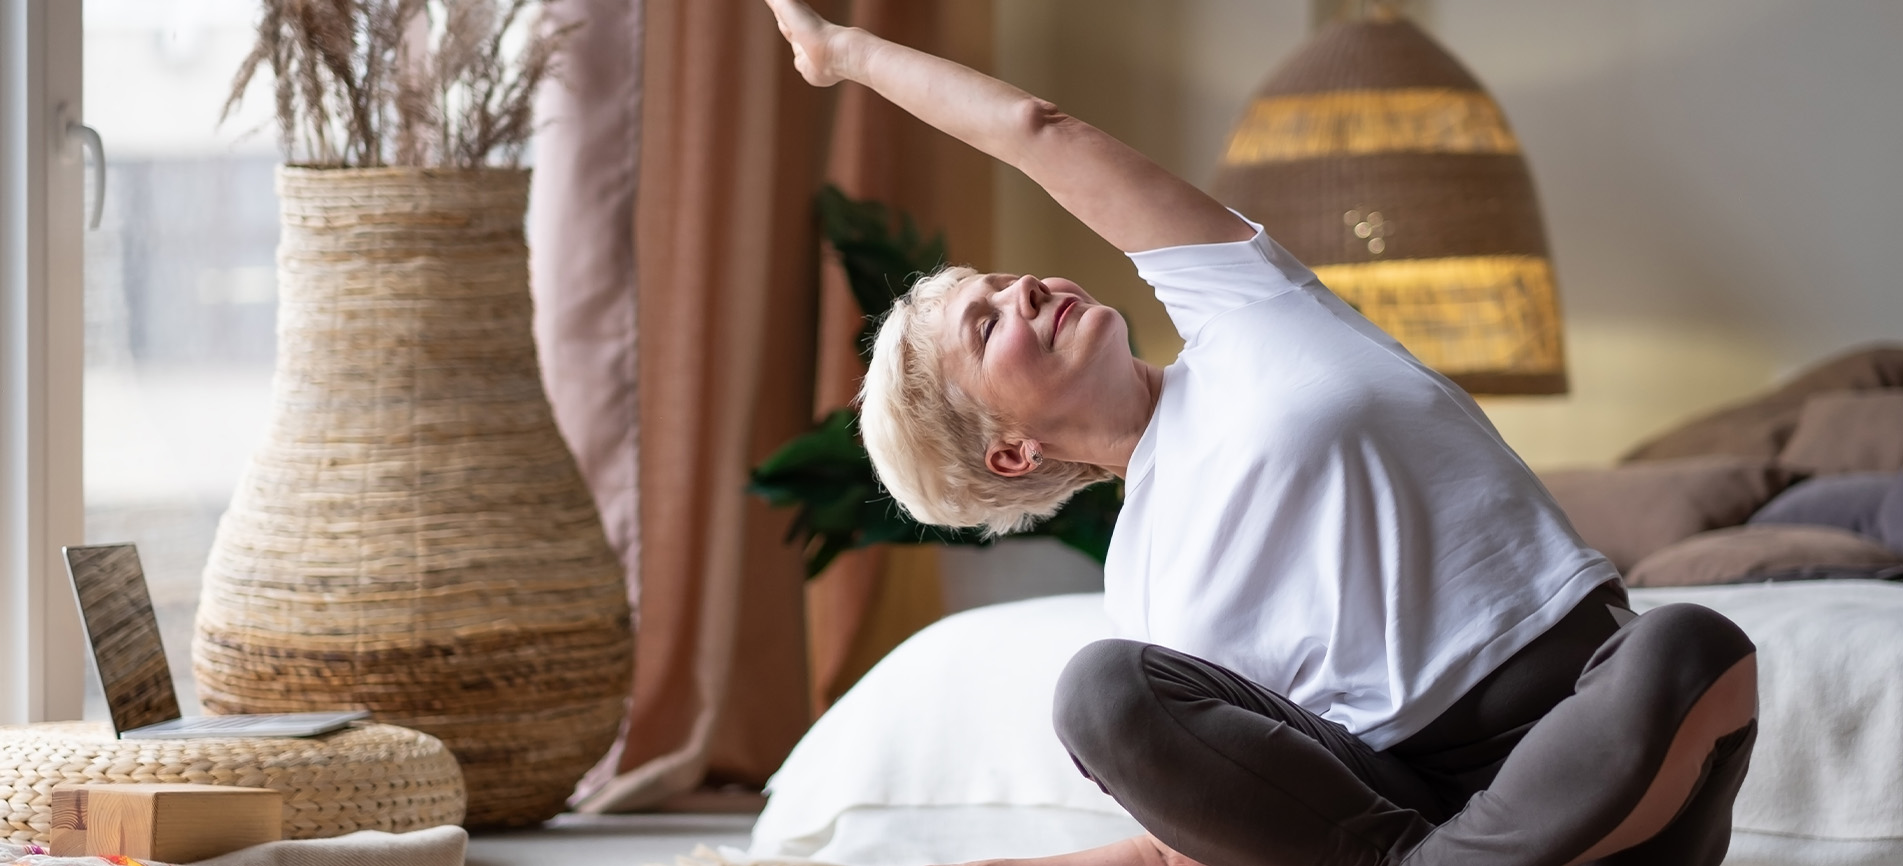 An older woman is pictured stretching upward in her sunny and bright bedroom.